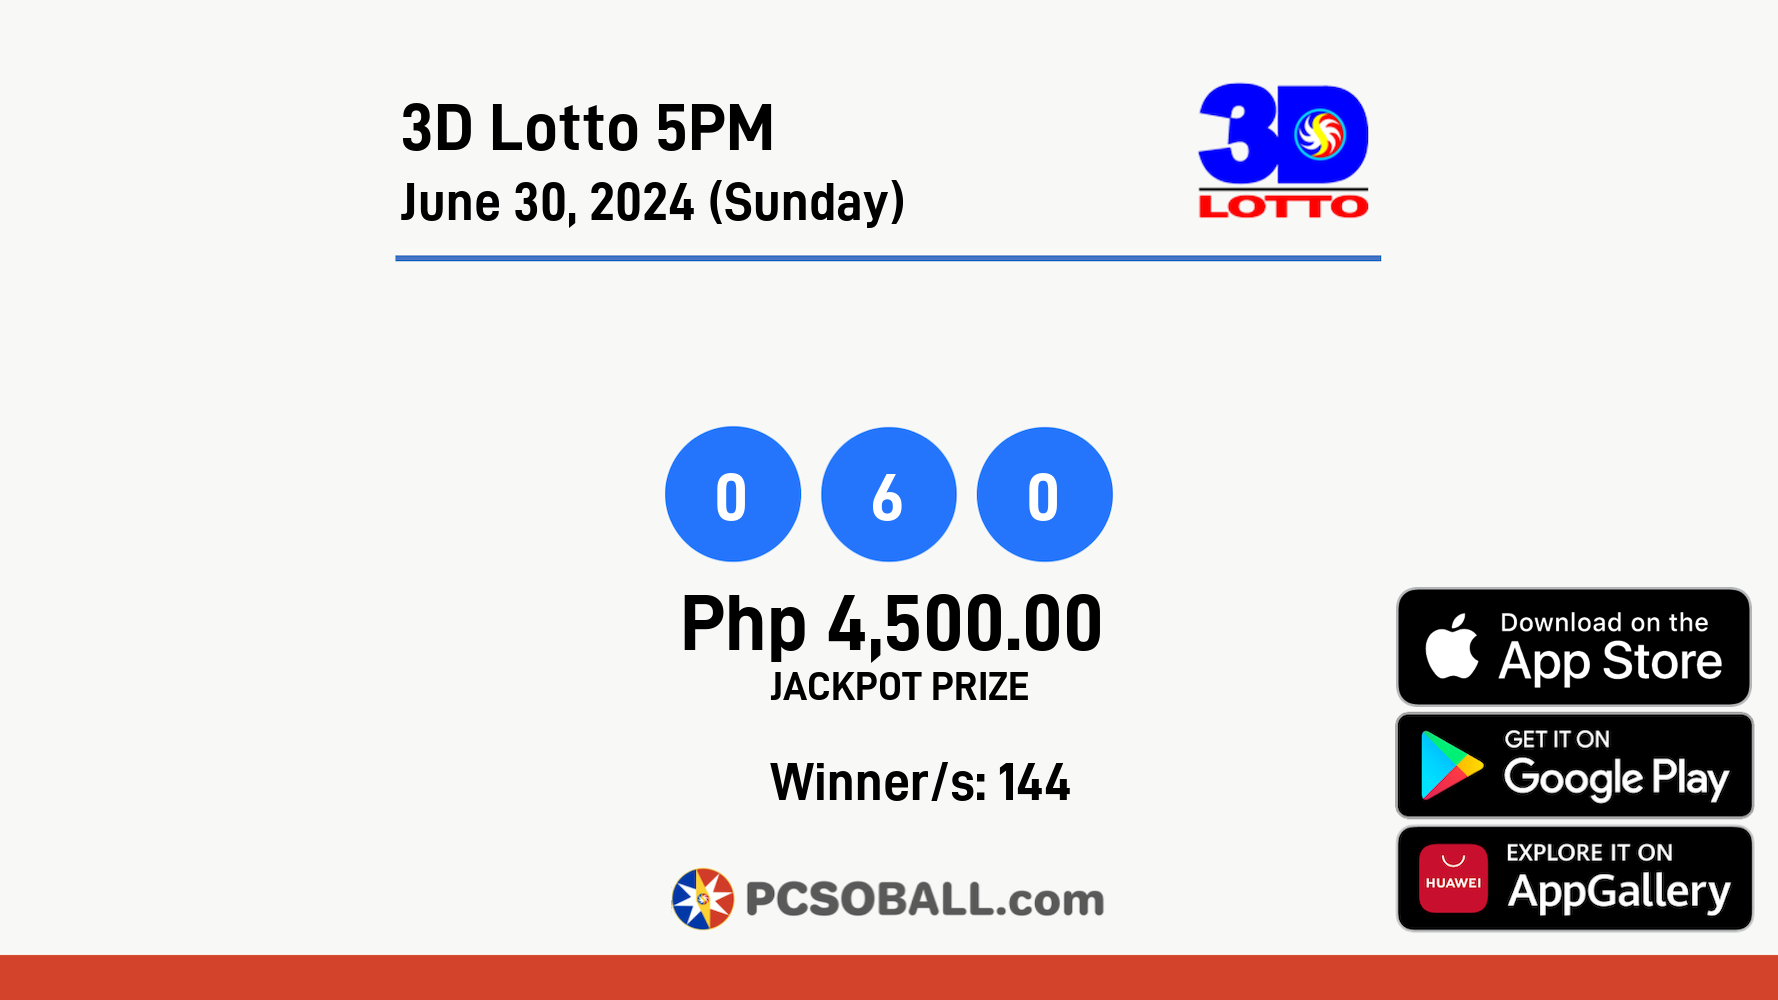 3D Lotto 5PM June 30, 2024 (Sunday) Result